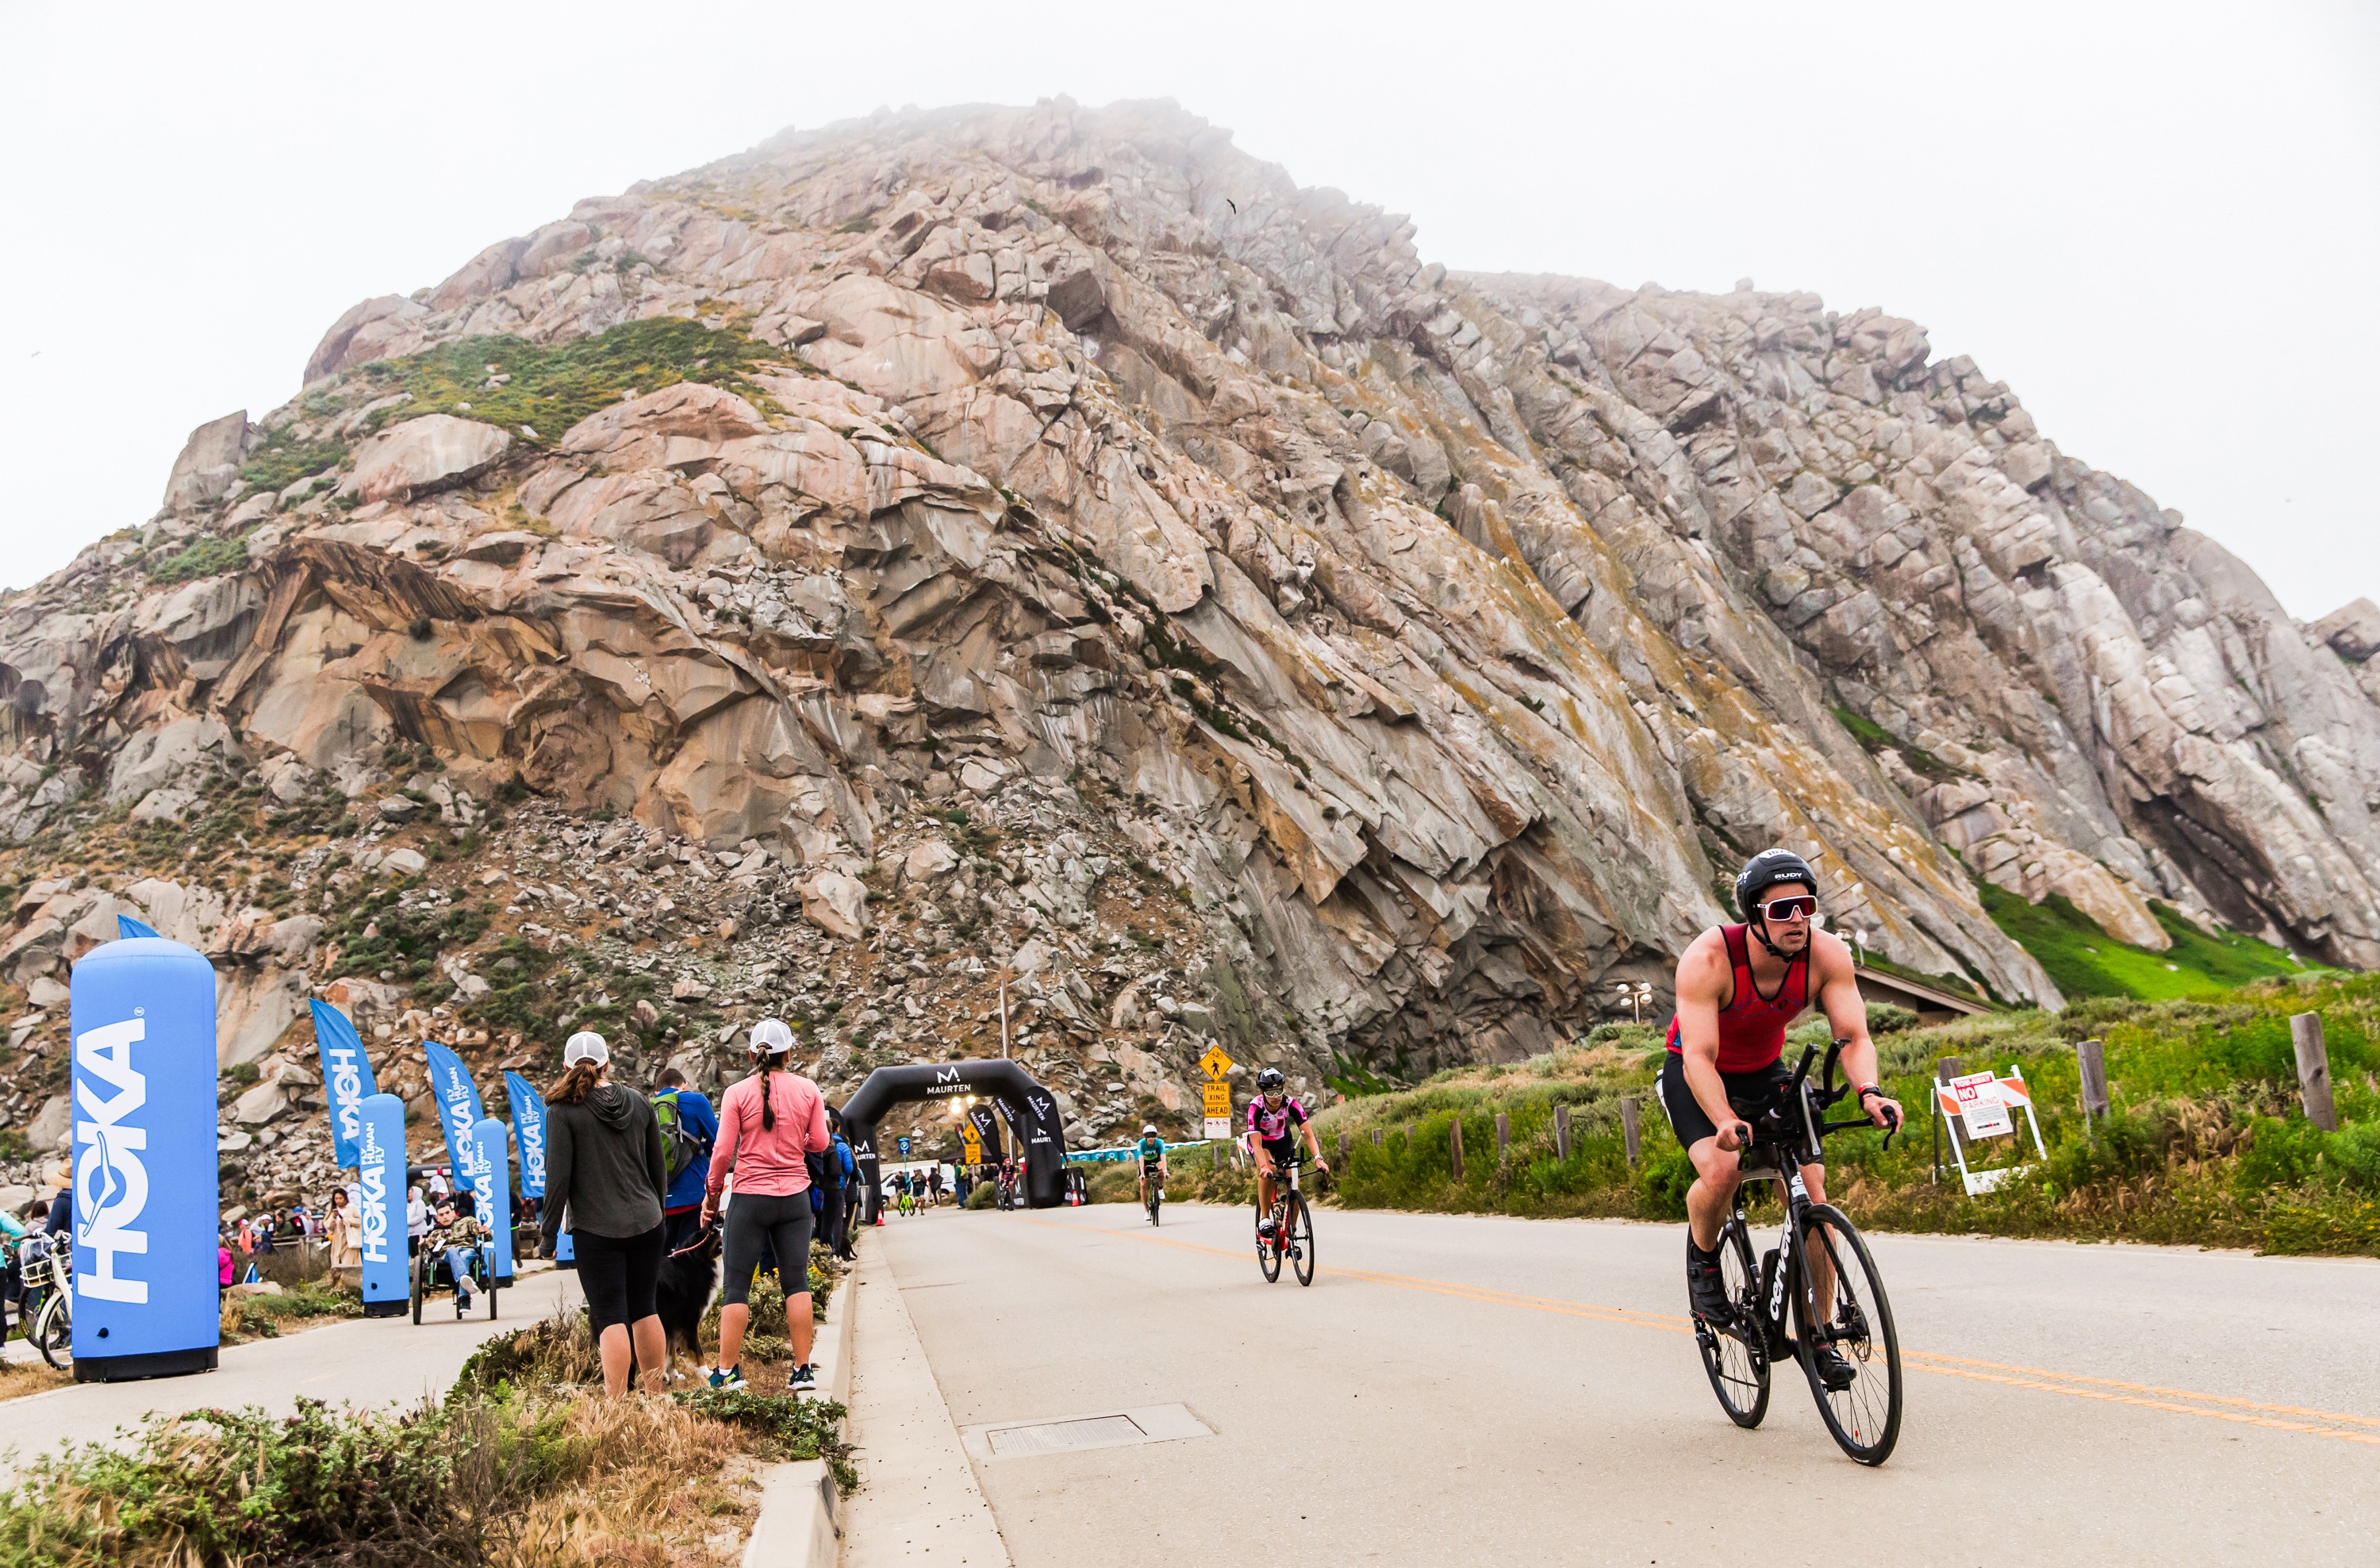 Morro Bay’s inaugural Ironman 70.3 drew thousands of triathletes and